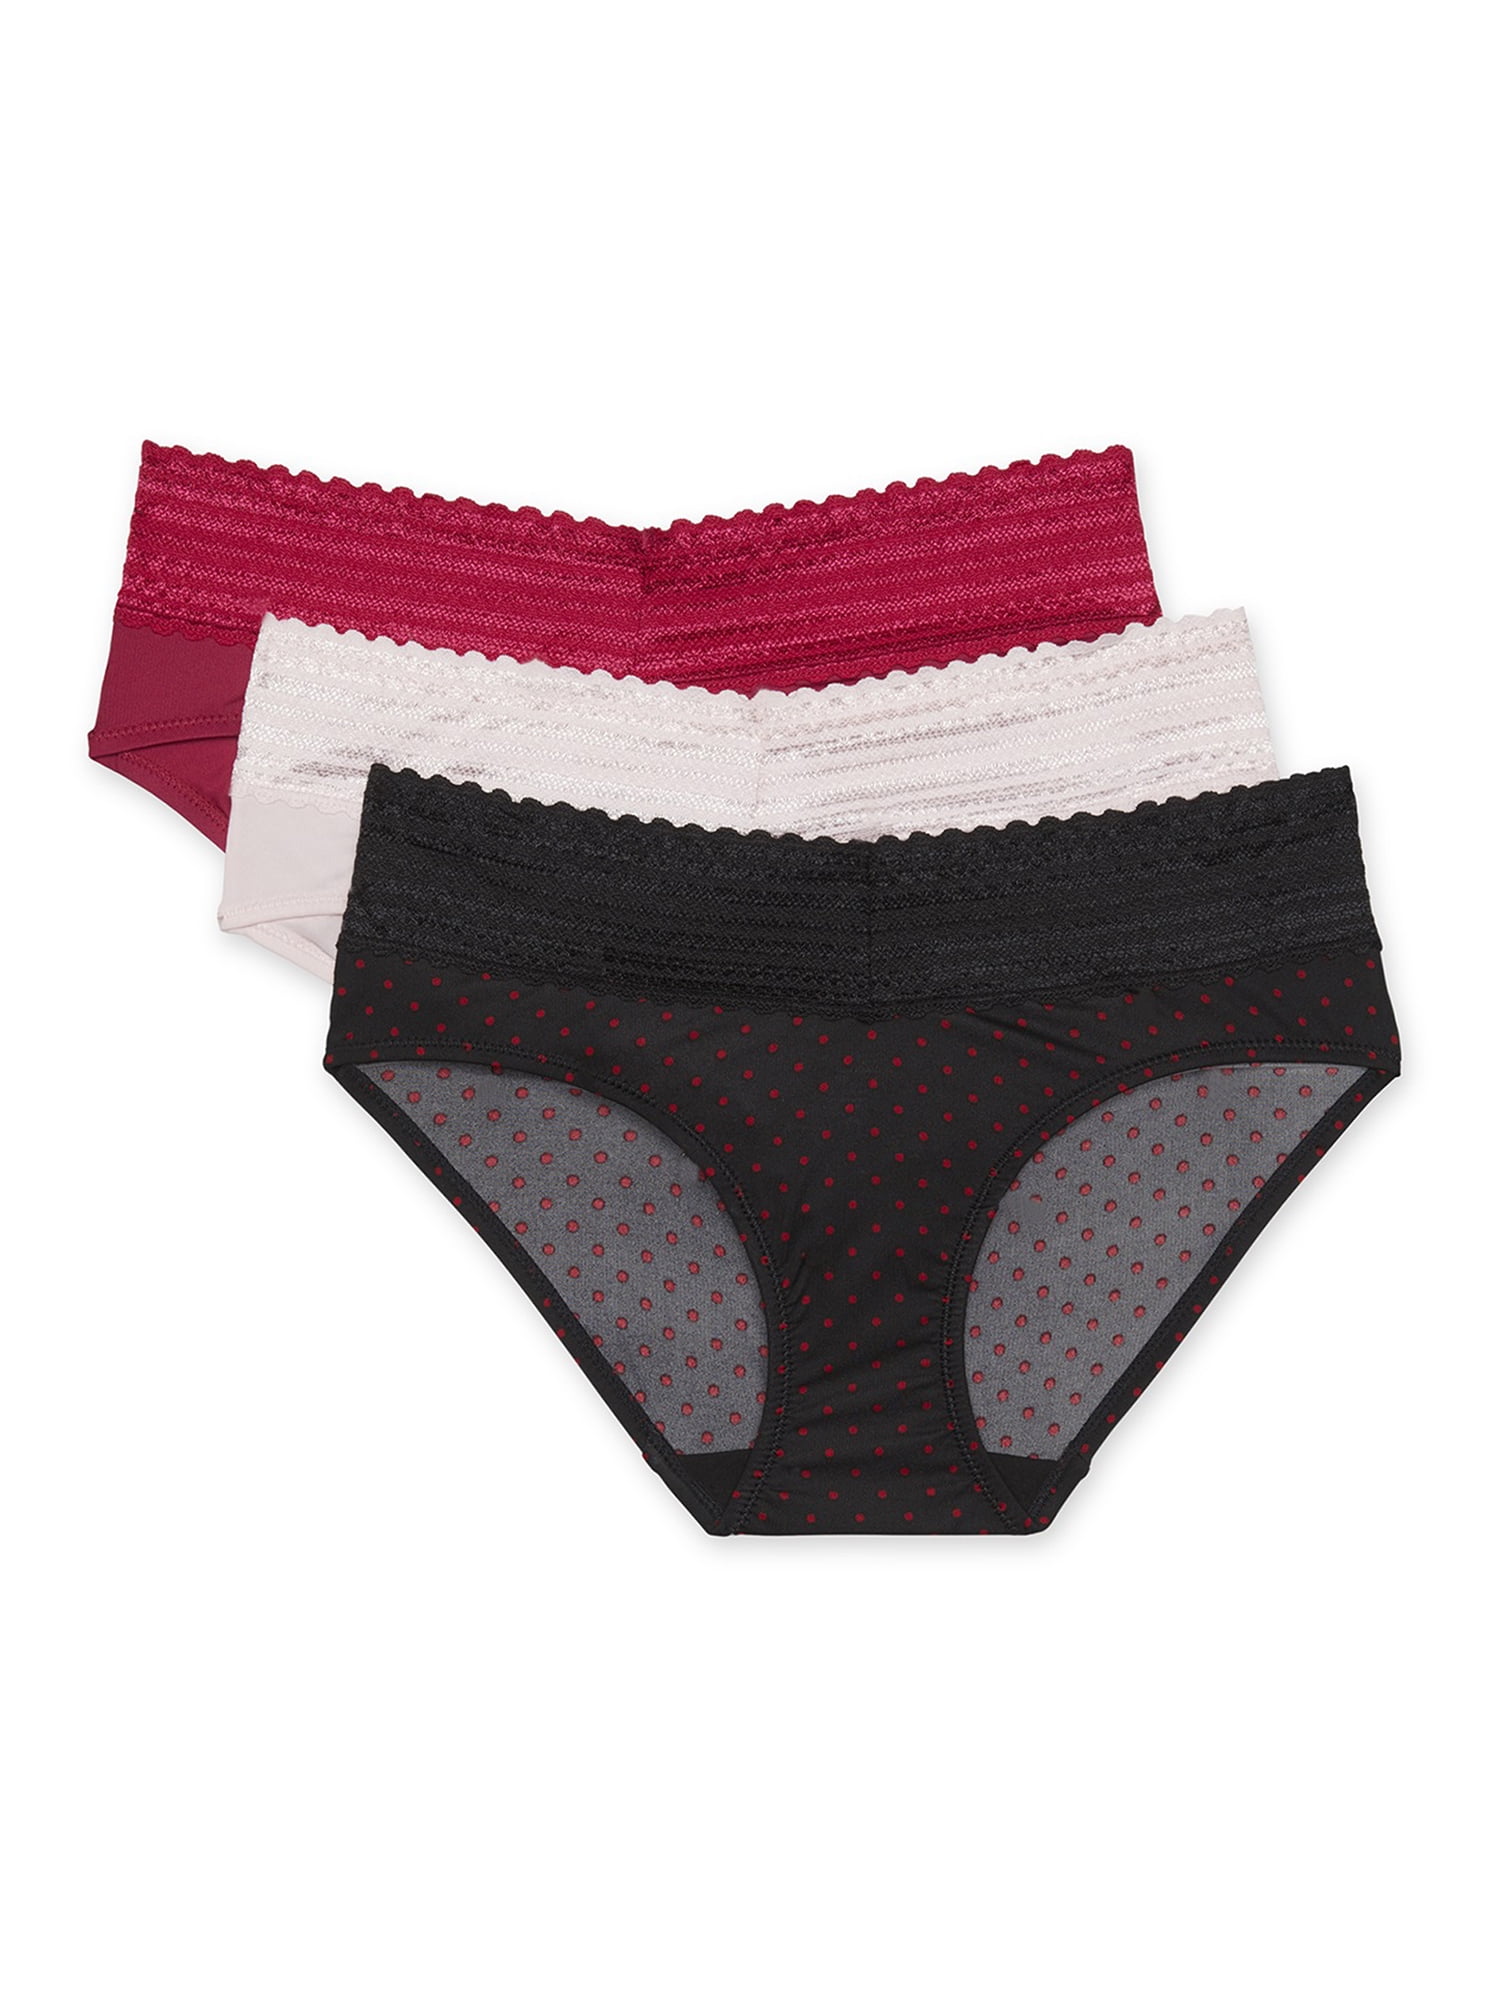 Warners® Blissful Benefits Dig-Free Comfort Waist with Lace Cotton Hipster  6-Pack RU2266W 